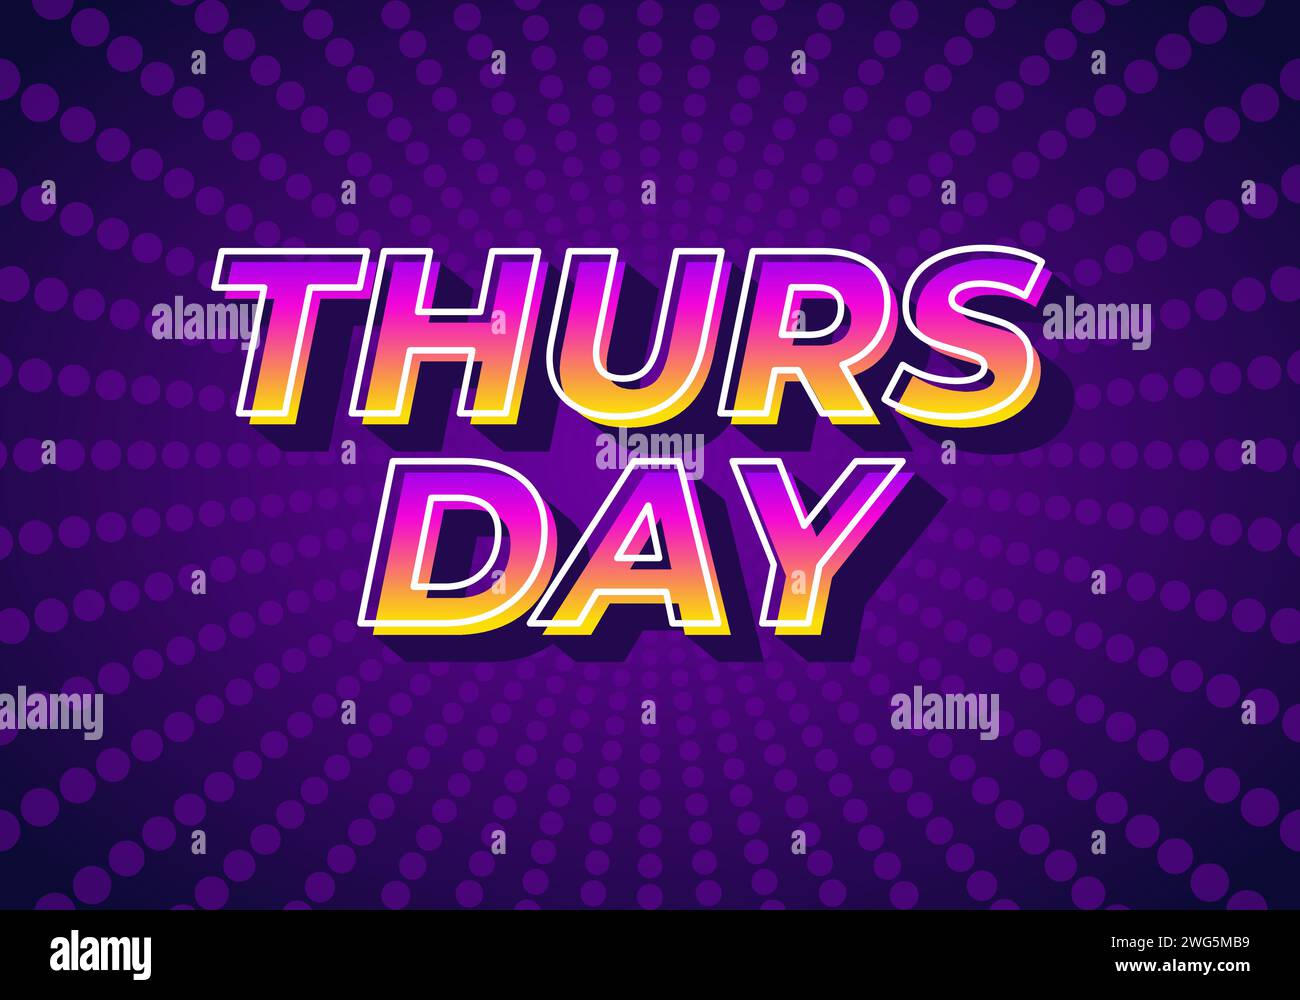 Thursday. Text effect design in 3D look with gradient purple yellow color Stock Vector